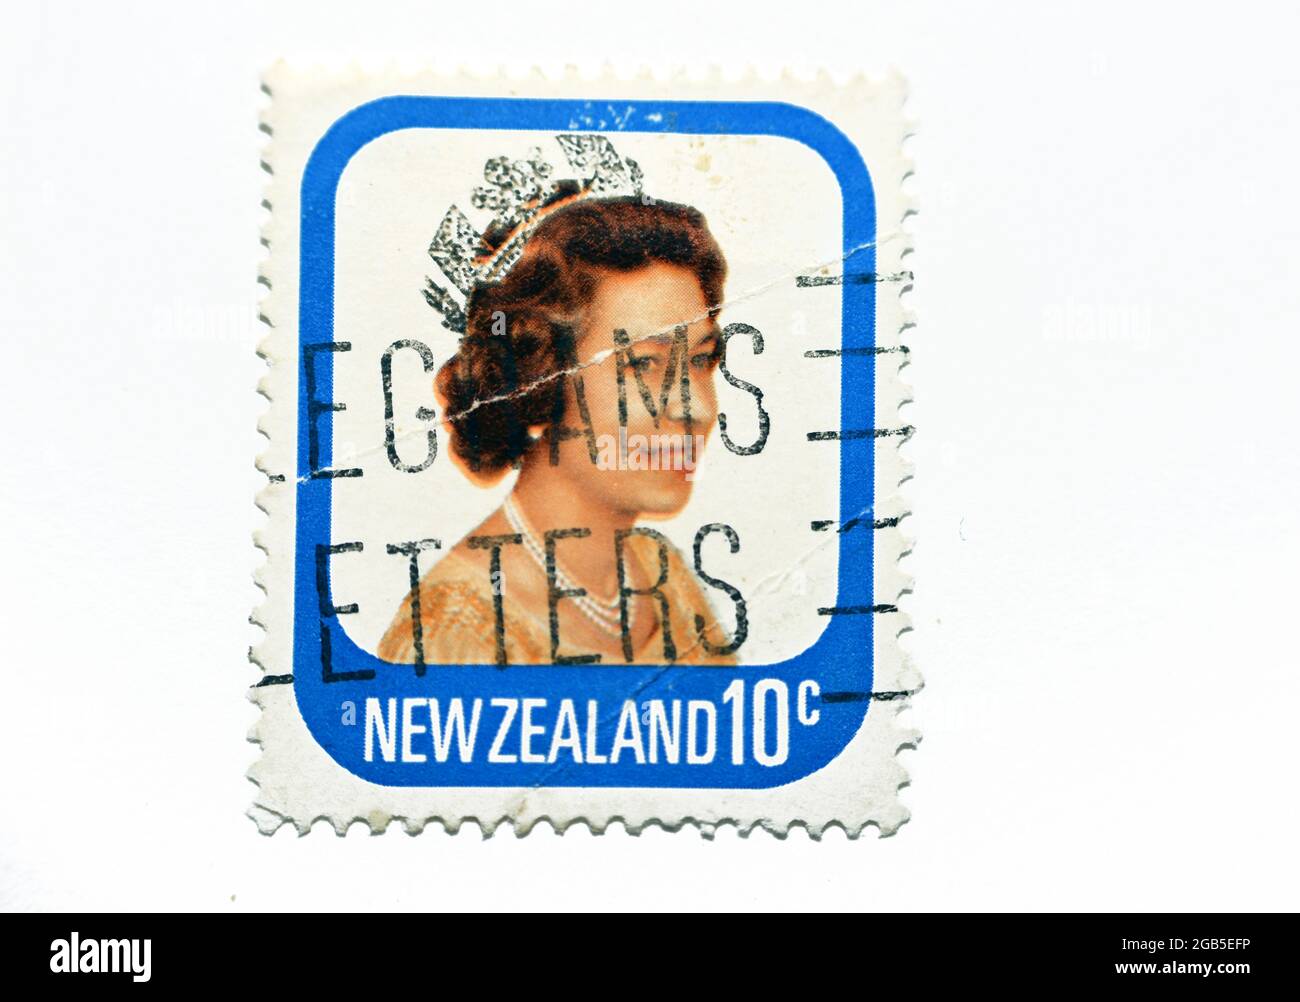 Postage stamp printed in New Zealand shows Queen Elizabeth II, 10 c - New Zealand cent, series, circa 1977, New Zealand Post Mark, Value 10c ten cents Stock Photo